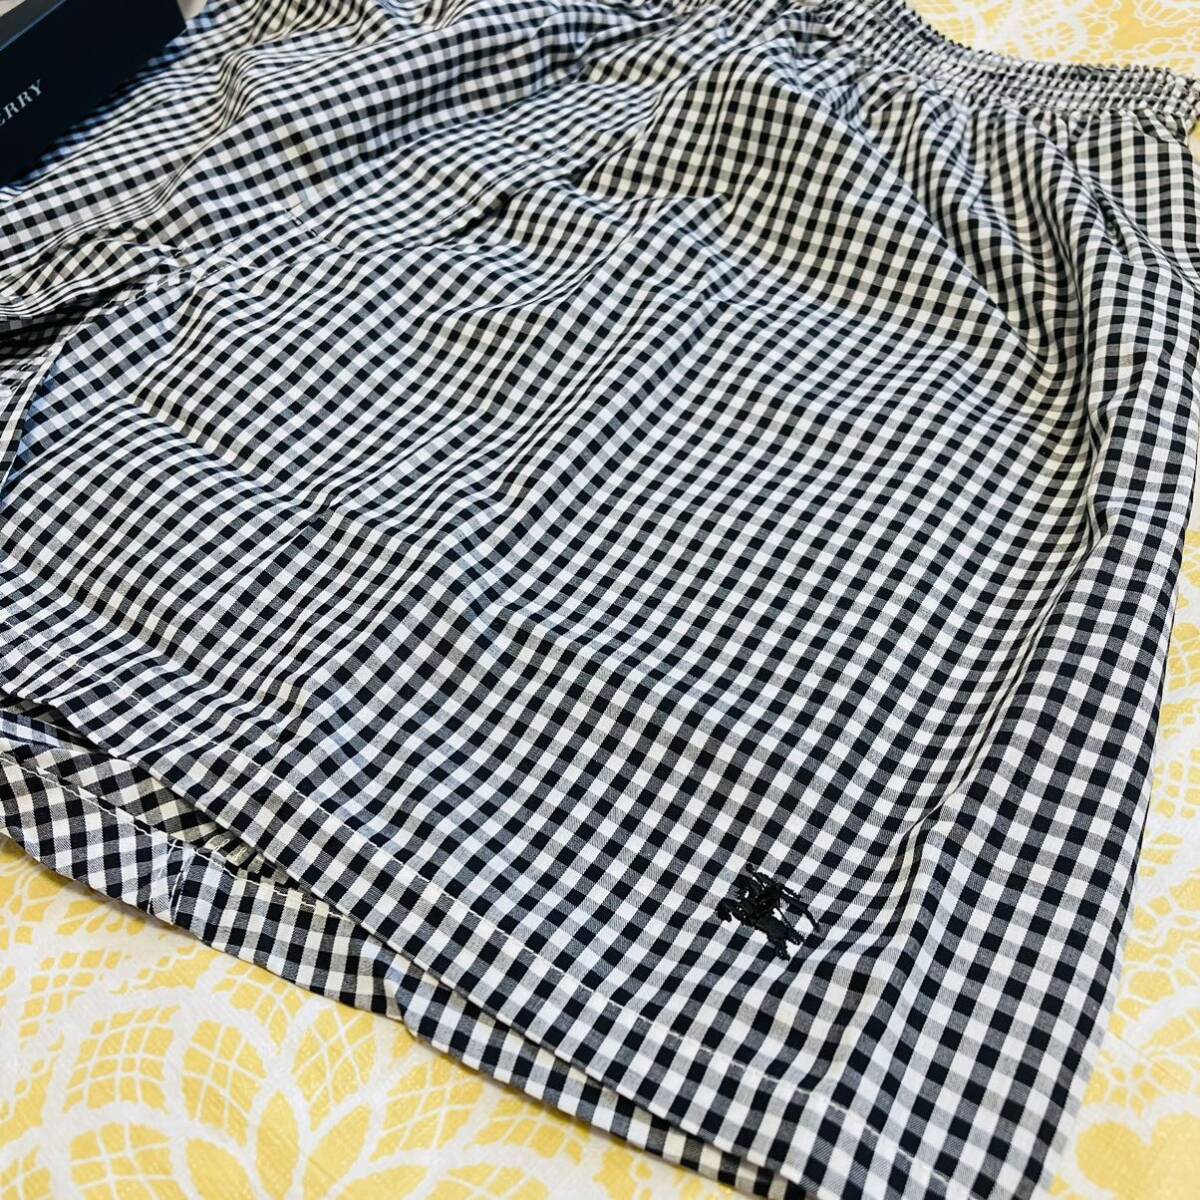 [ popular pattern ] new goods /BURBERRY/L size / trunks / Burberry / underwear men's / cotton 100%/ unused / regular goods / gentleman for brand anonymity delivery /noba check / in box / black 